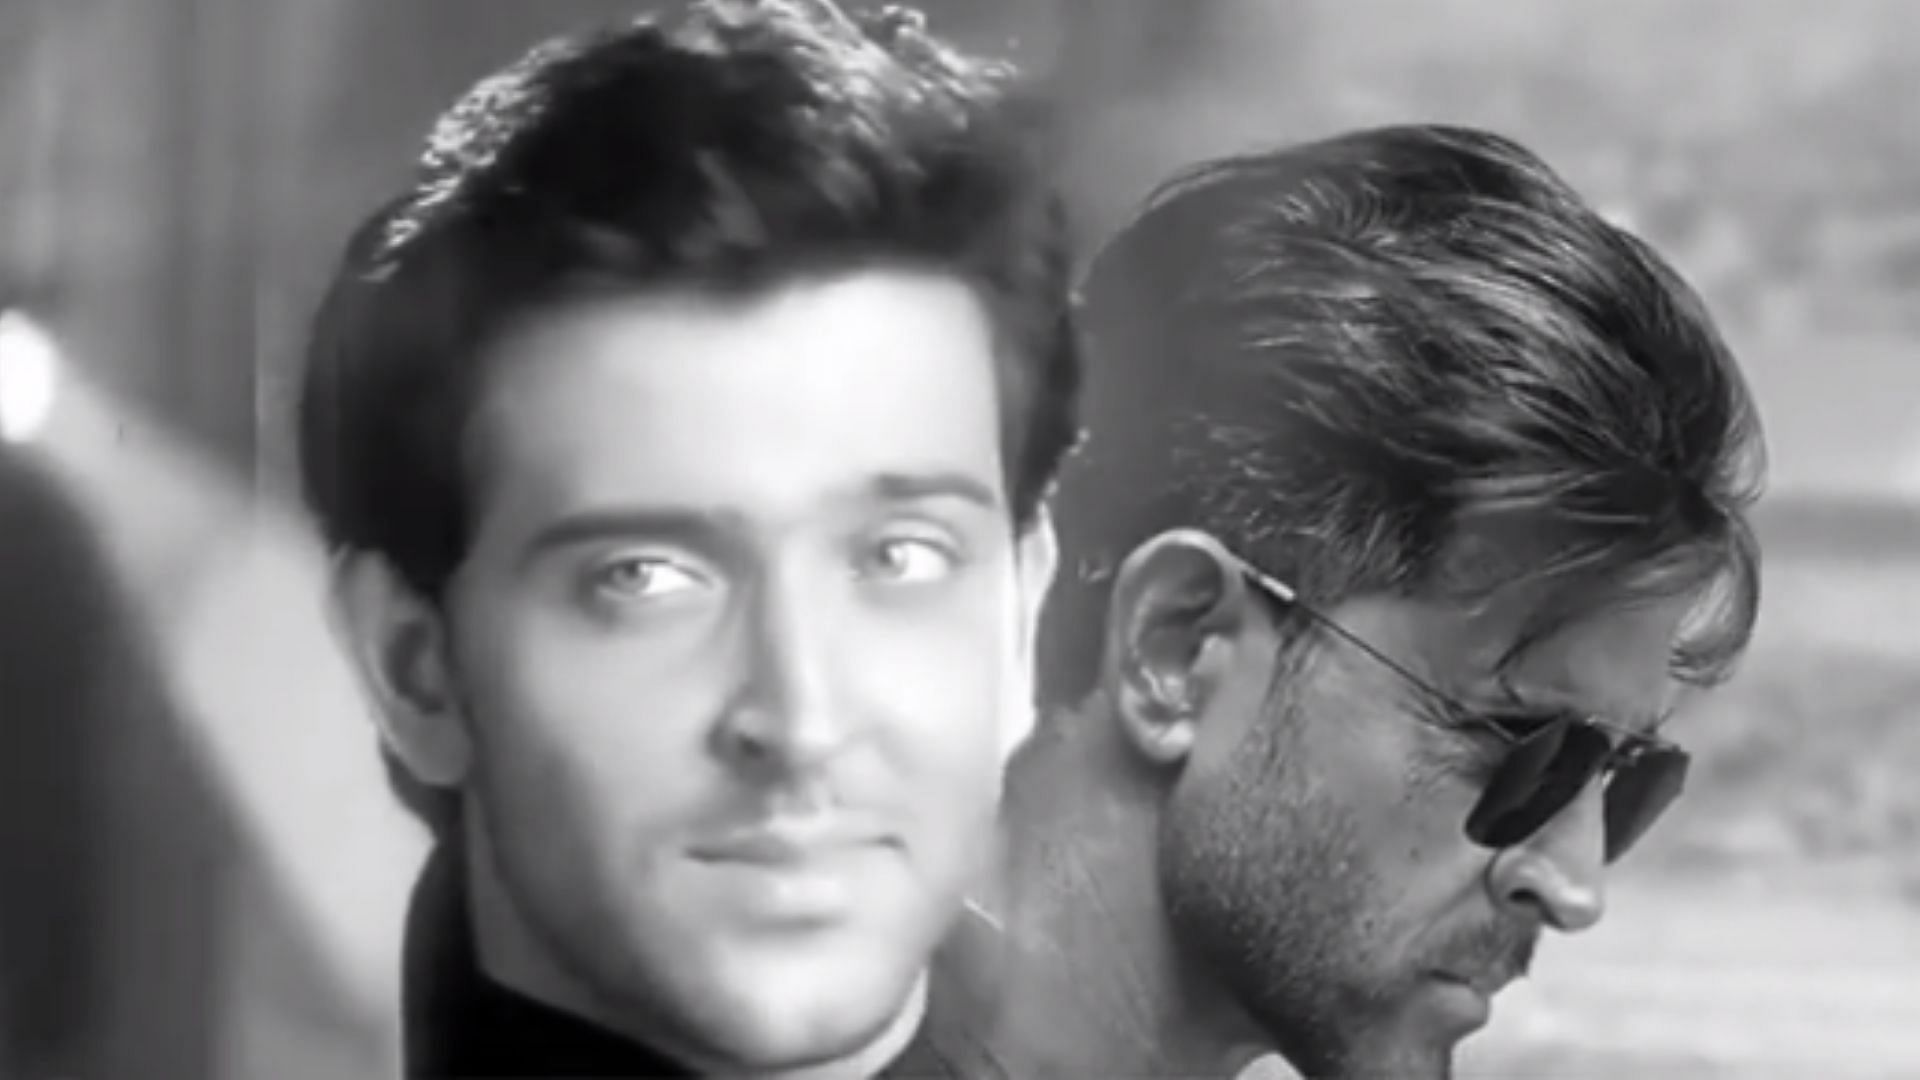 Hrithik Roshan looks back at 20 years in Bollywood.